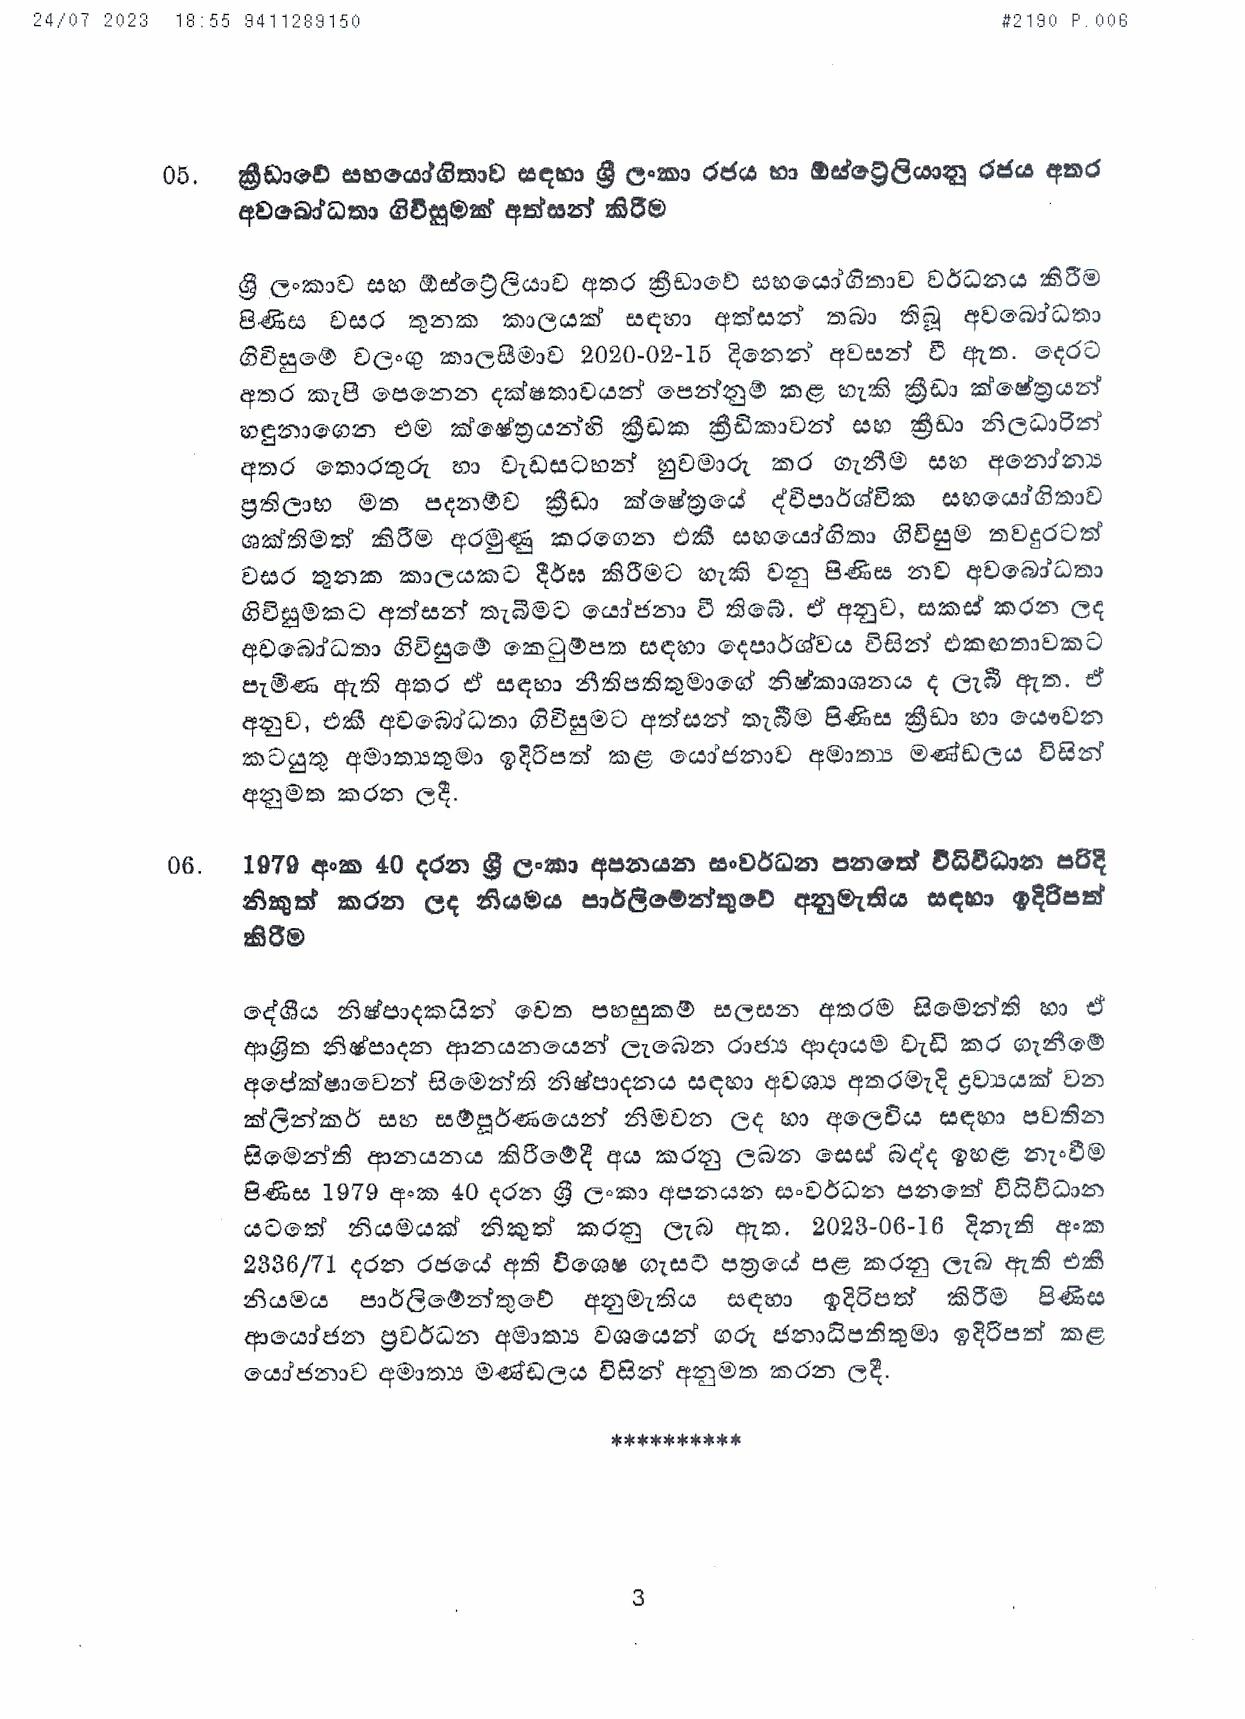 Cabinet Decision on 24.07.2023 page 003